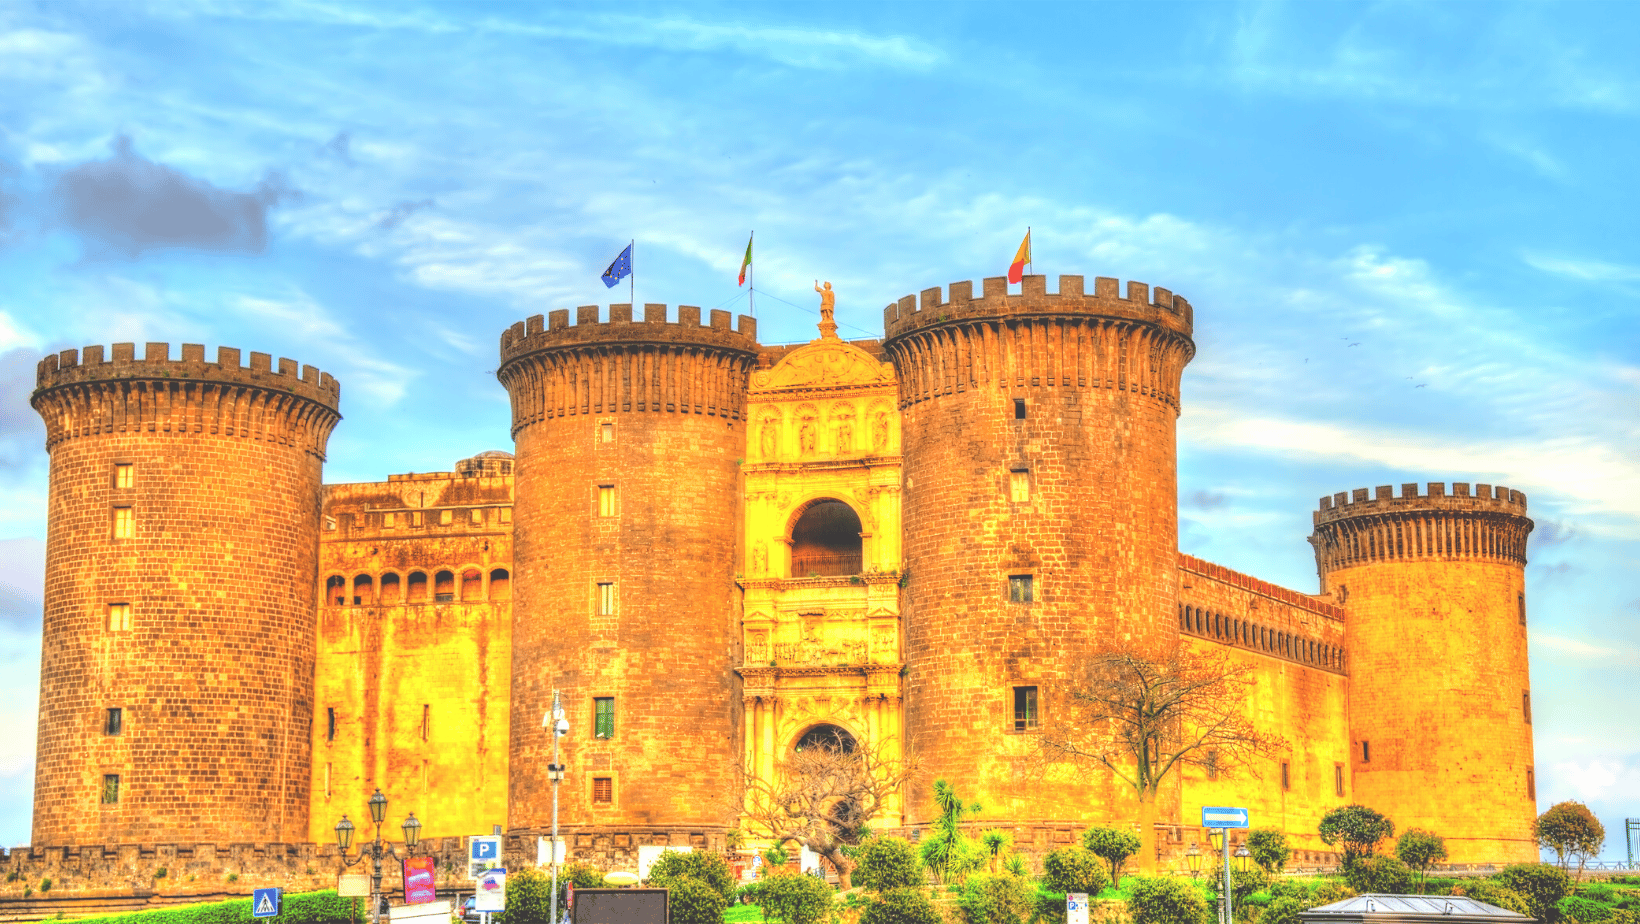 Naples, Italy – The City of Castles